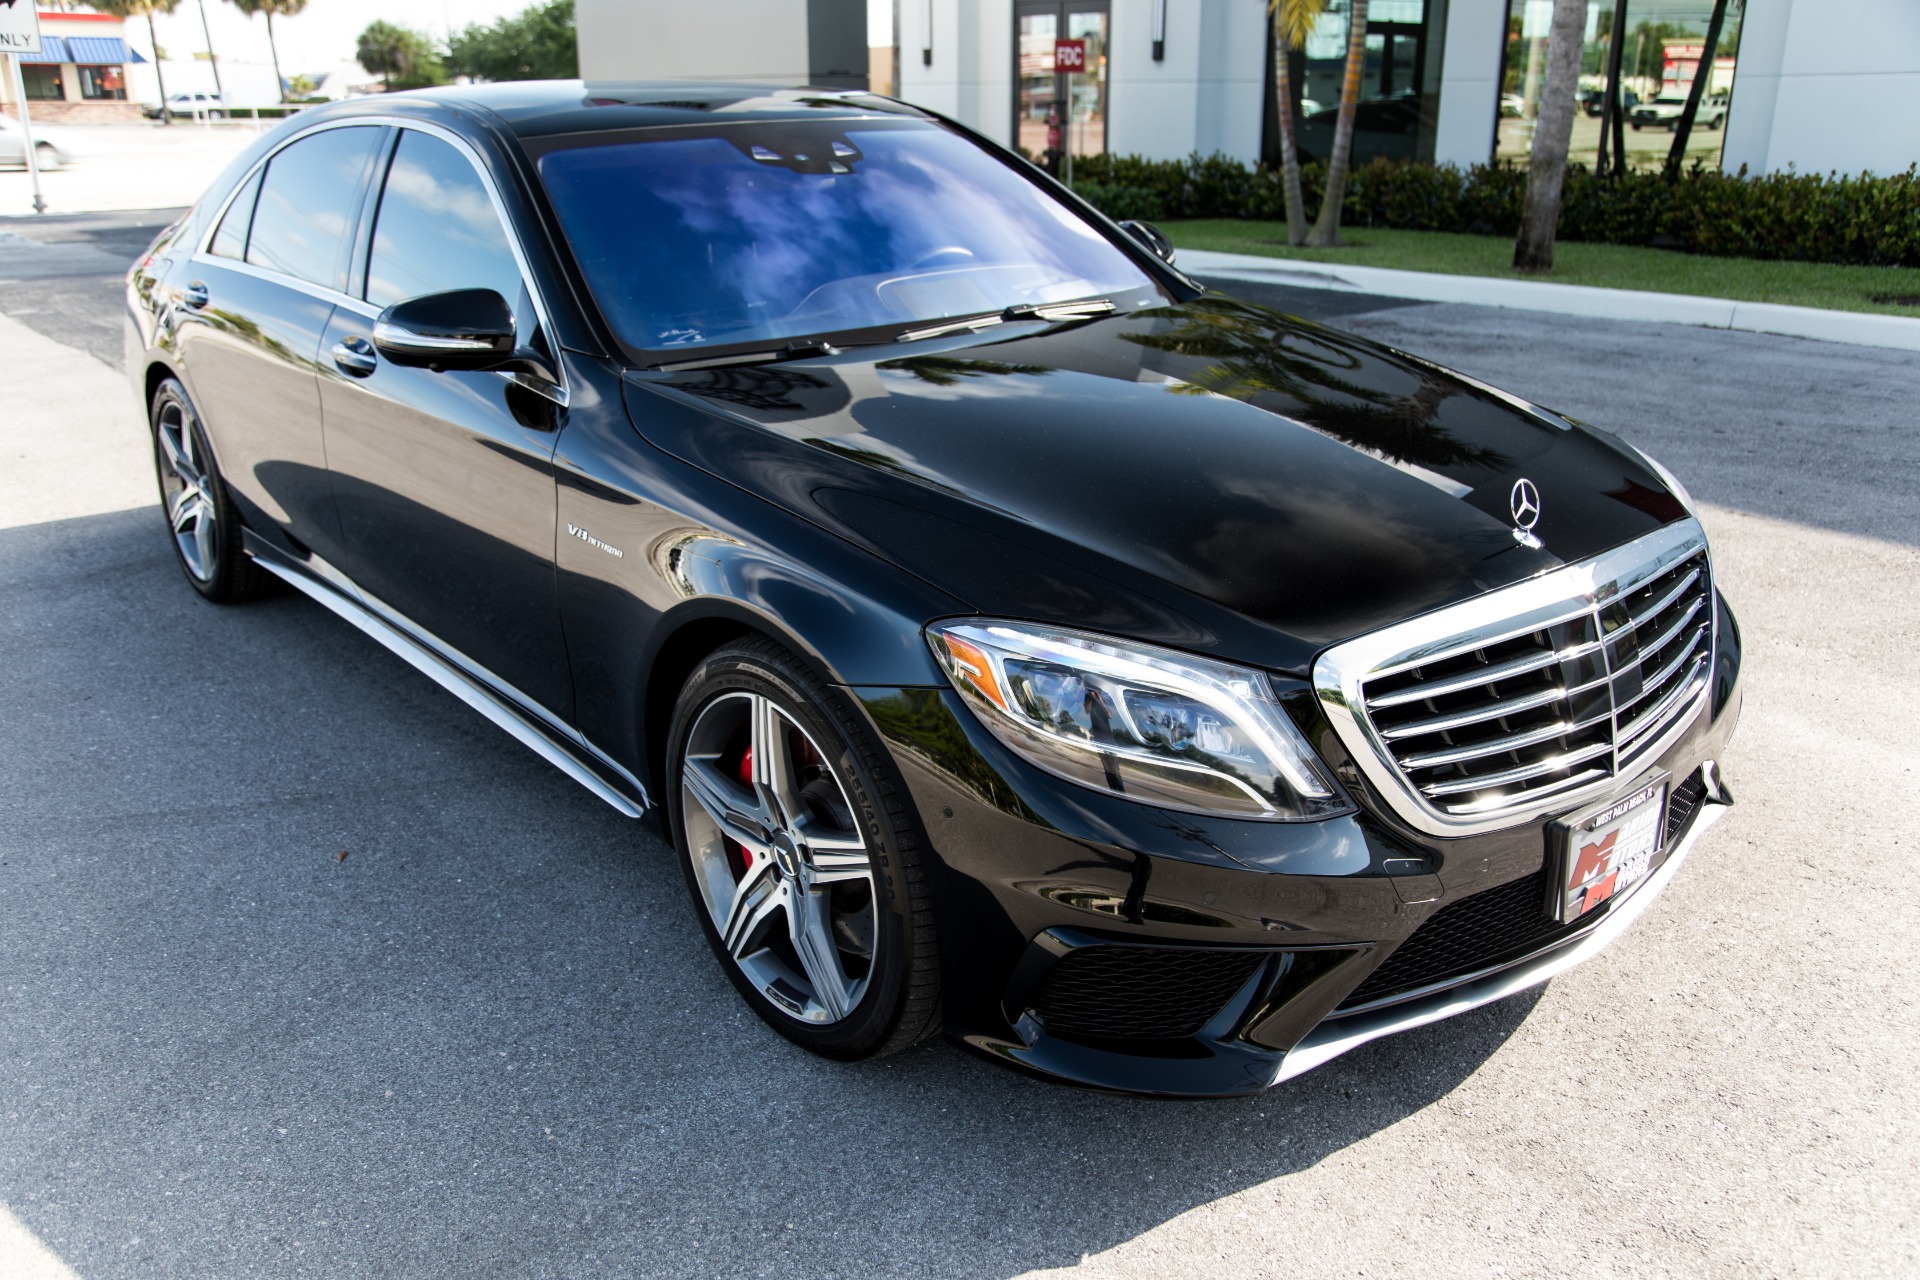 Used 2015 Mercedes Benz S Class S 63 AMG For Sale 82 900 Marino 